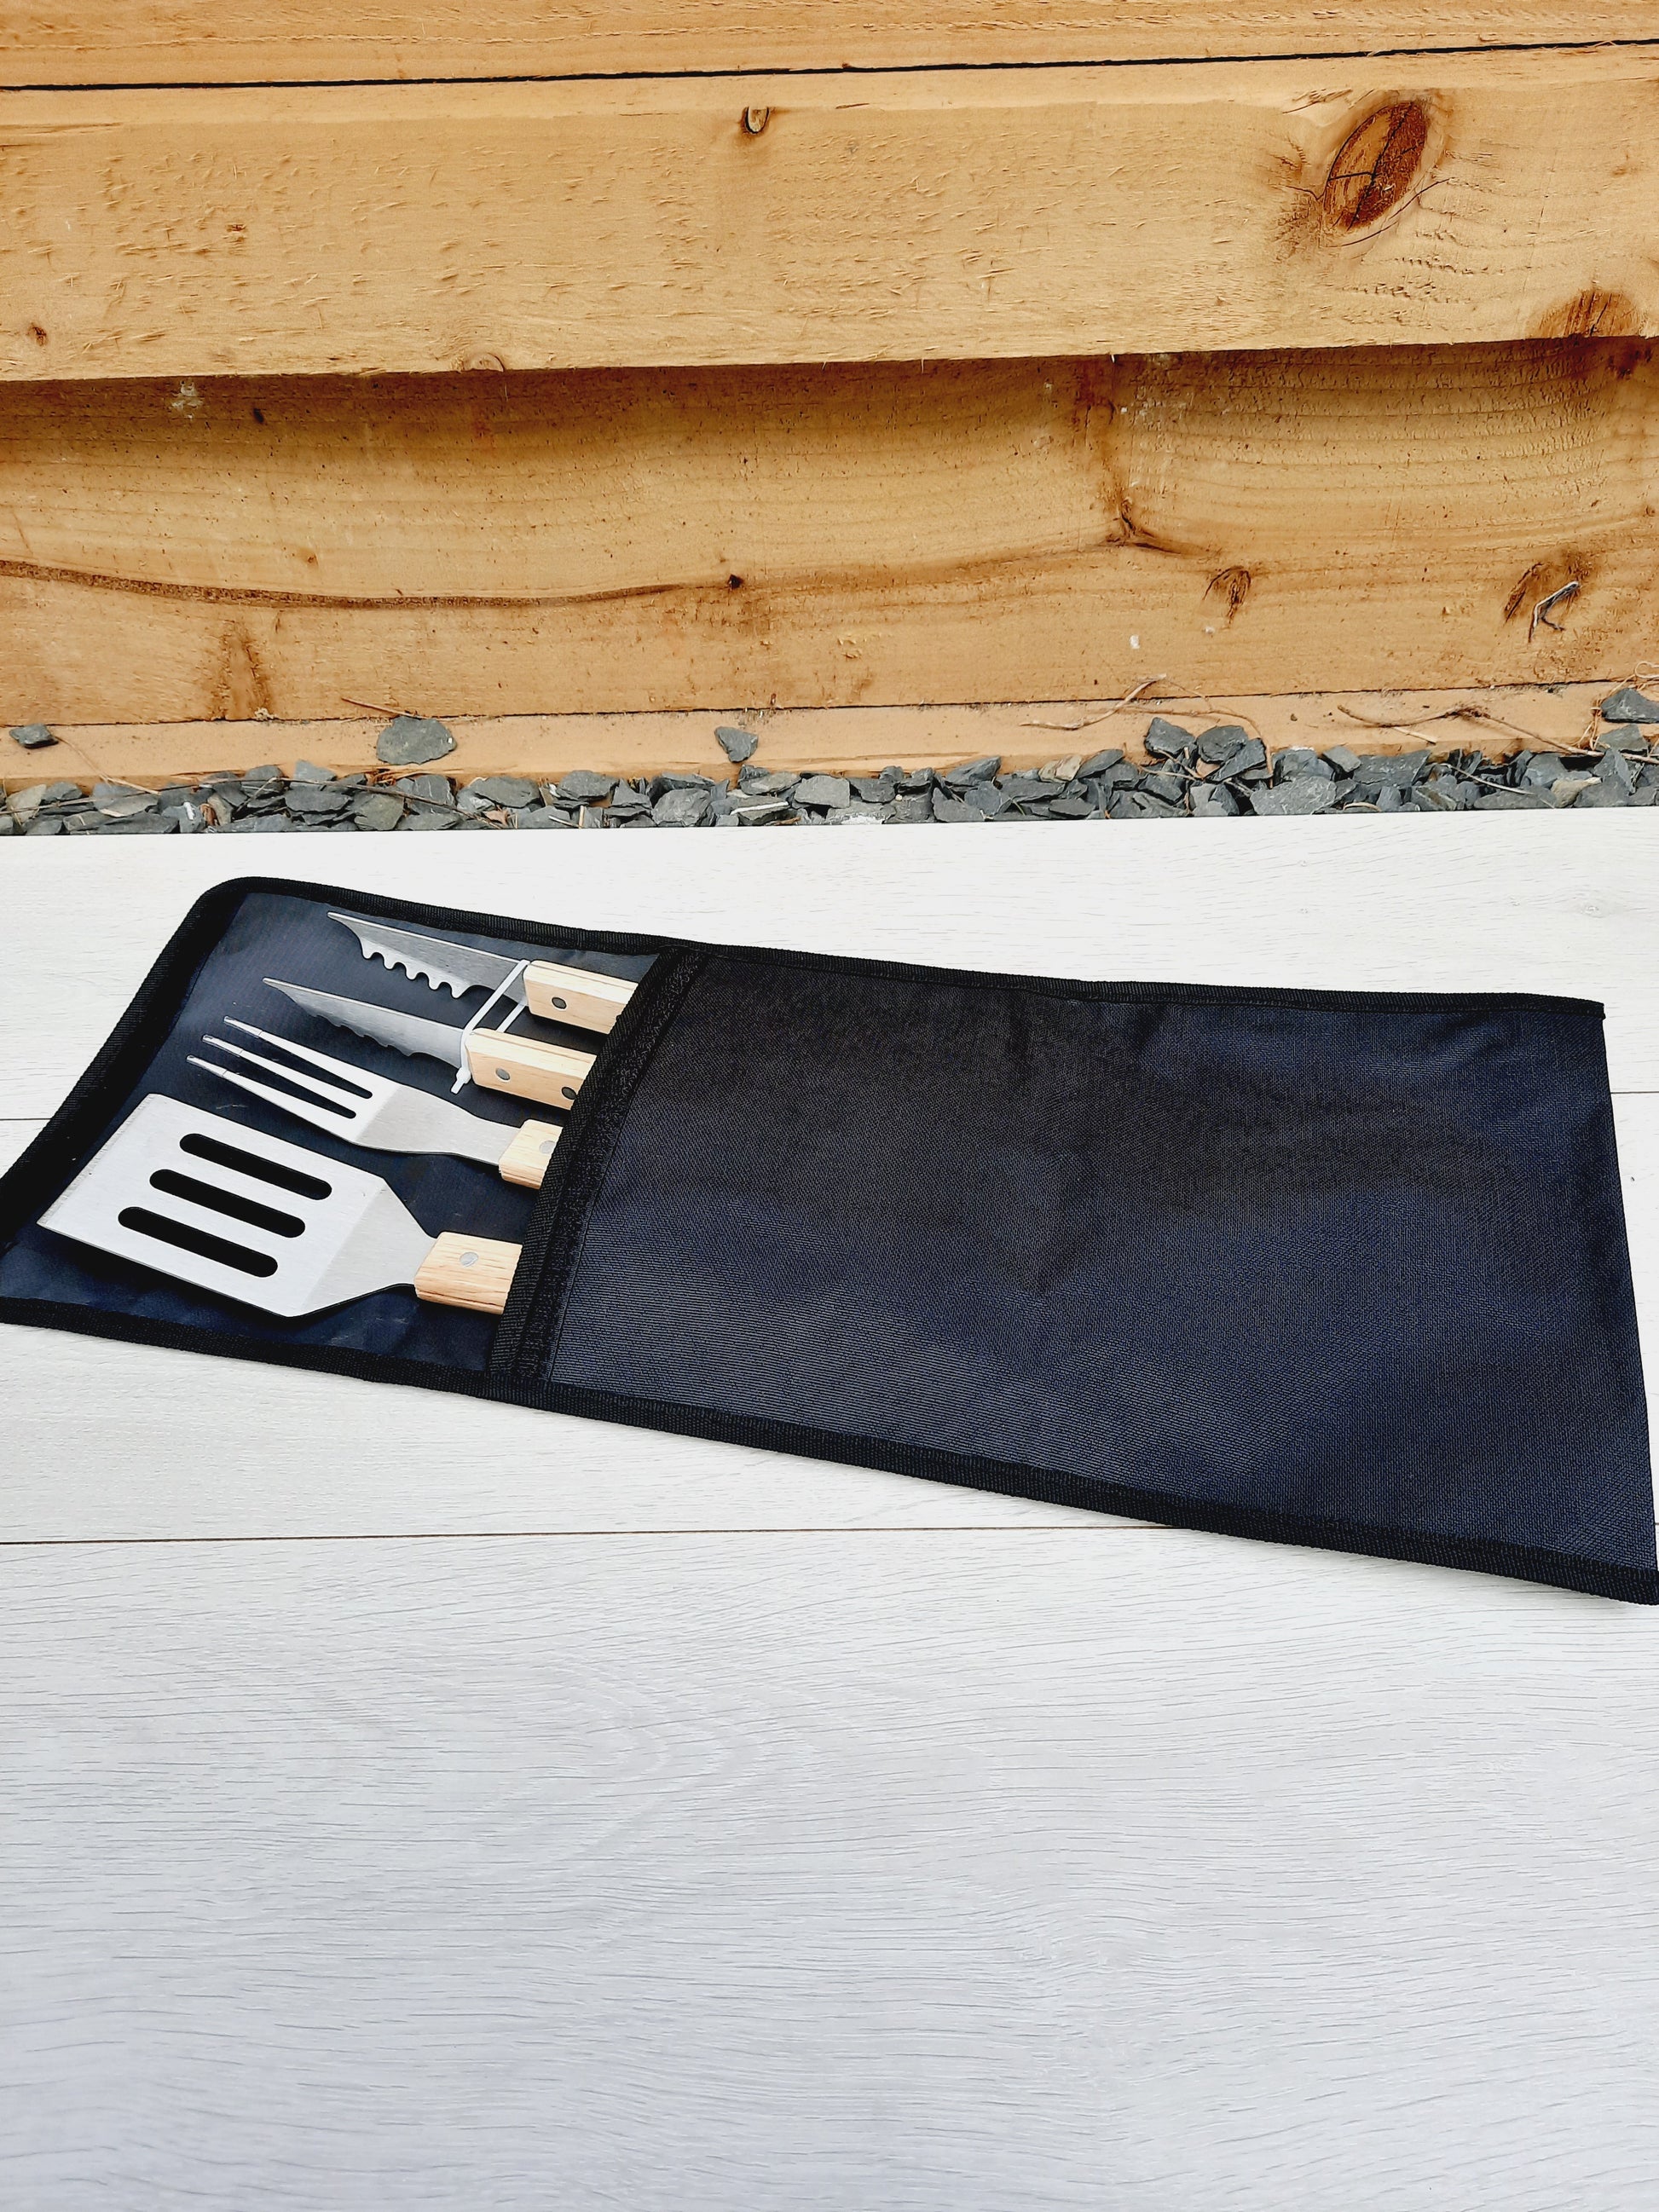 Personalised BBQ Tool Set inside the black canvas bag.